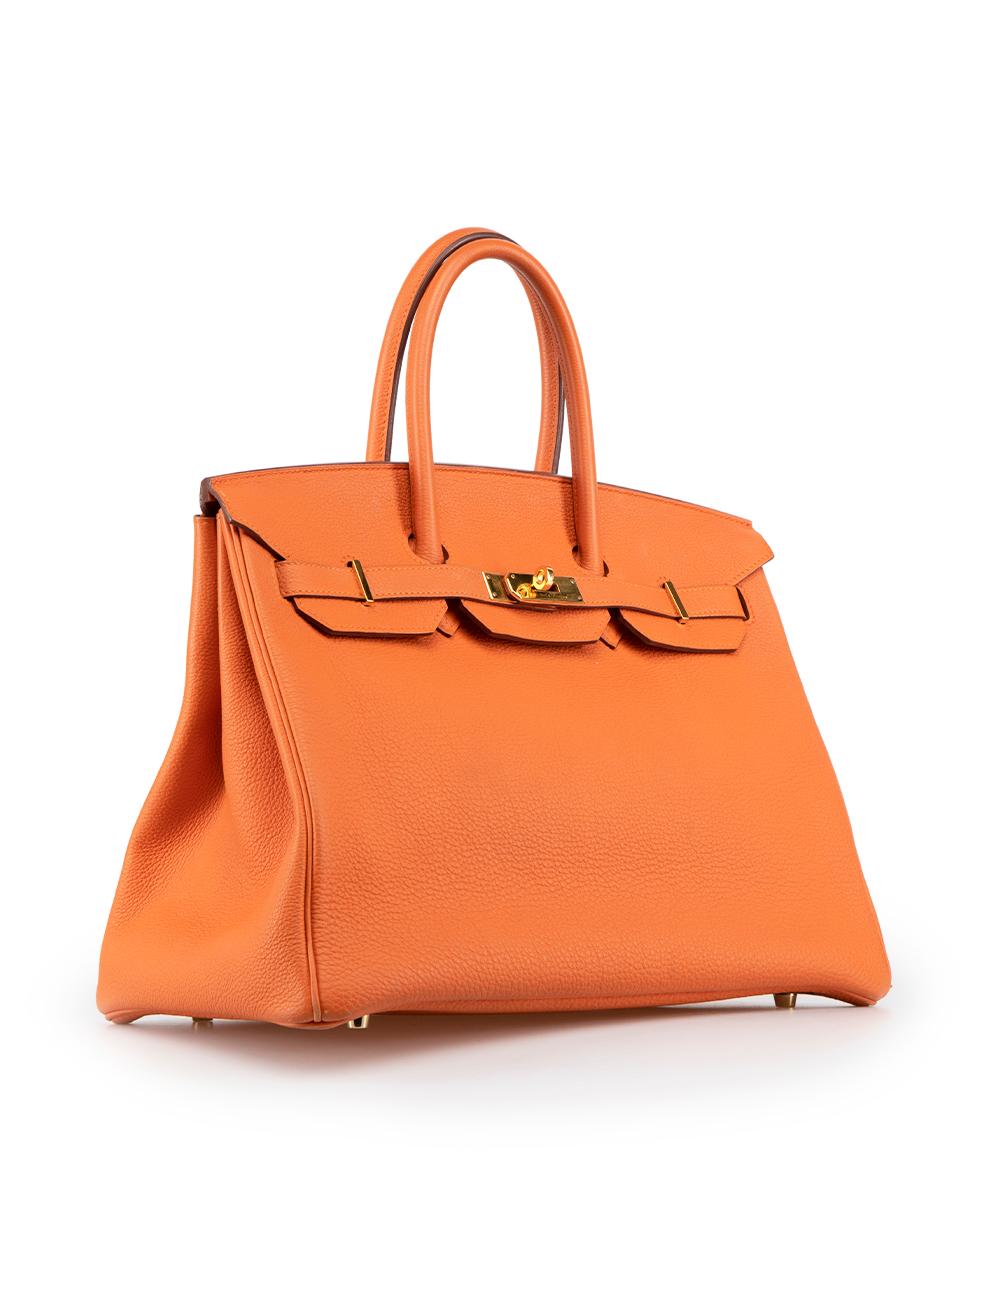 CONDITION is Very good. Minimal wear to bag is evident. Minimal wear to the front straps, base corners, rear handle base and the lining with discolouration and marks to the leather on this used Hermès designer resale item..

Details
2014
Birkin